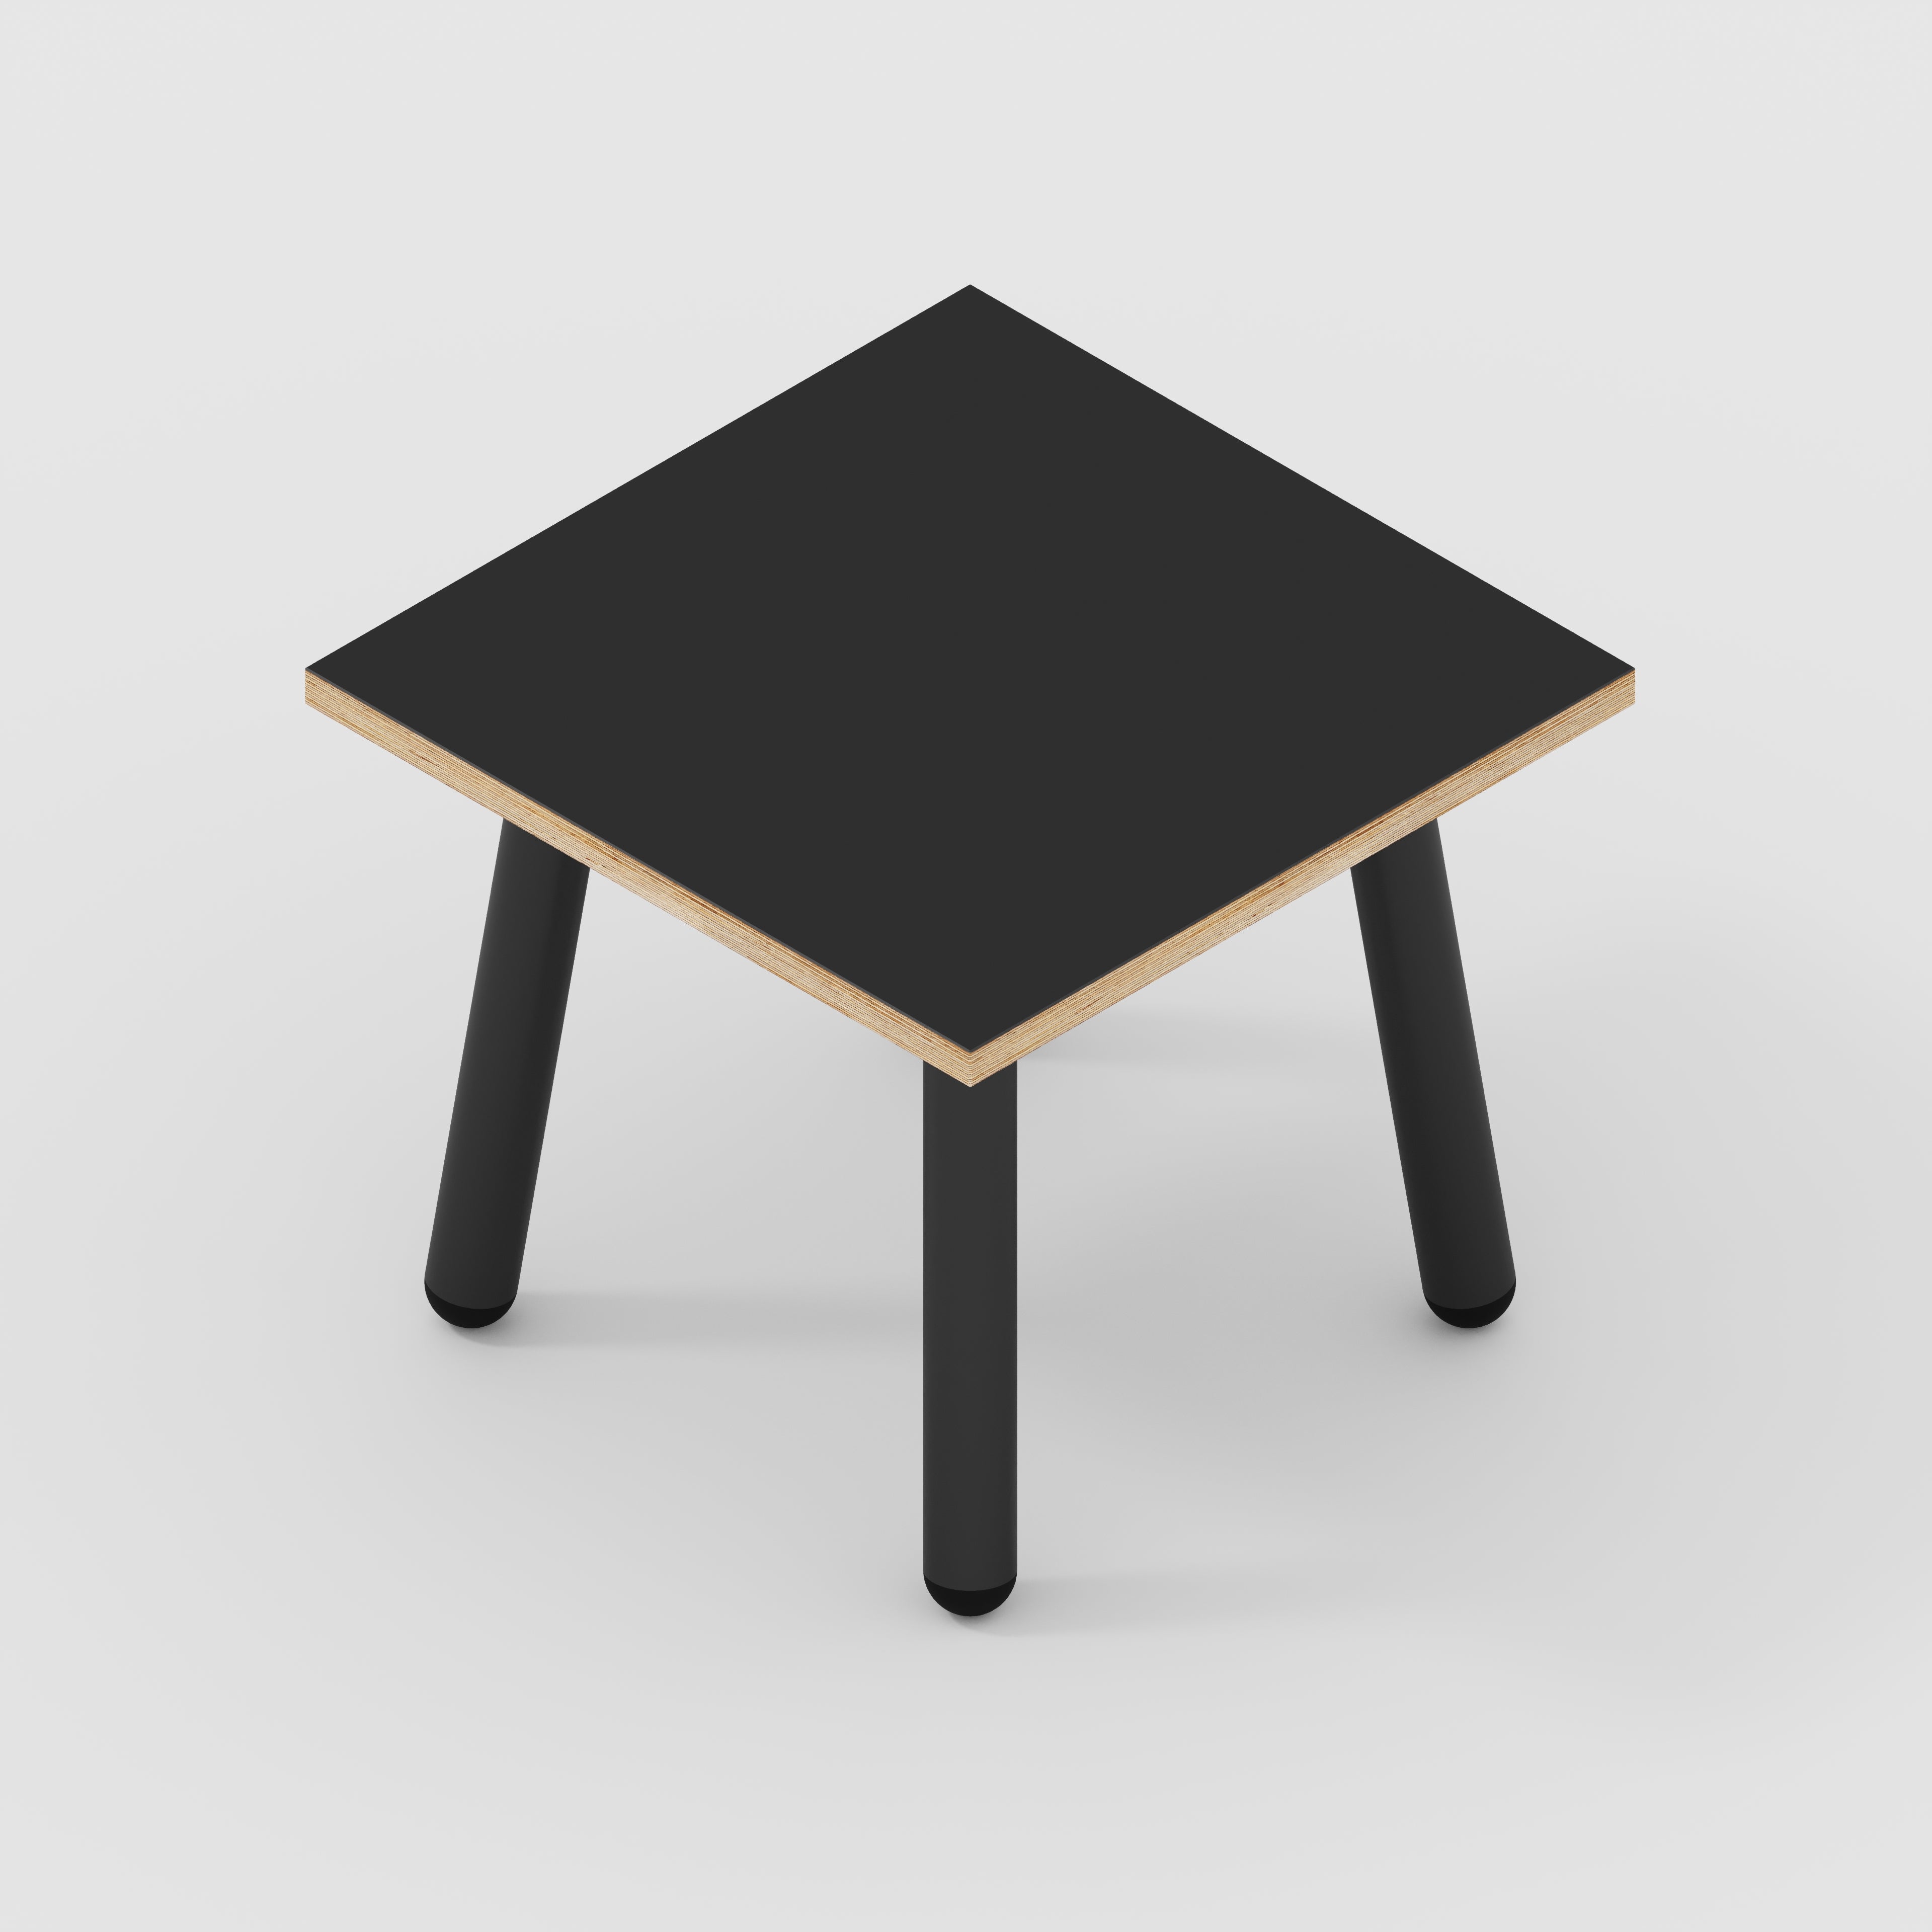 Side Table with Round Single Pin Legs - Formica Diamond Black - 500(w) x 500(d) x 425(h)